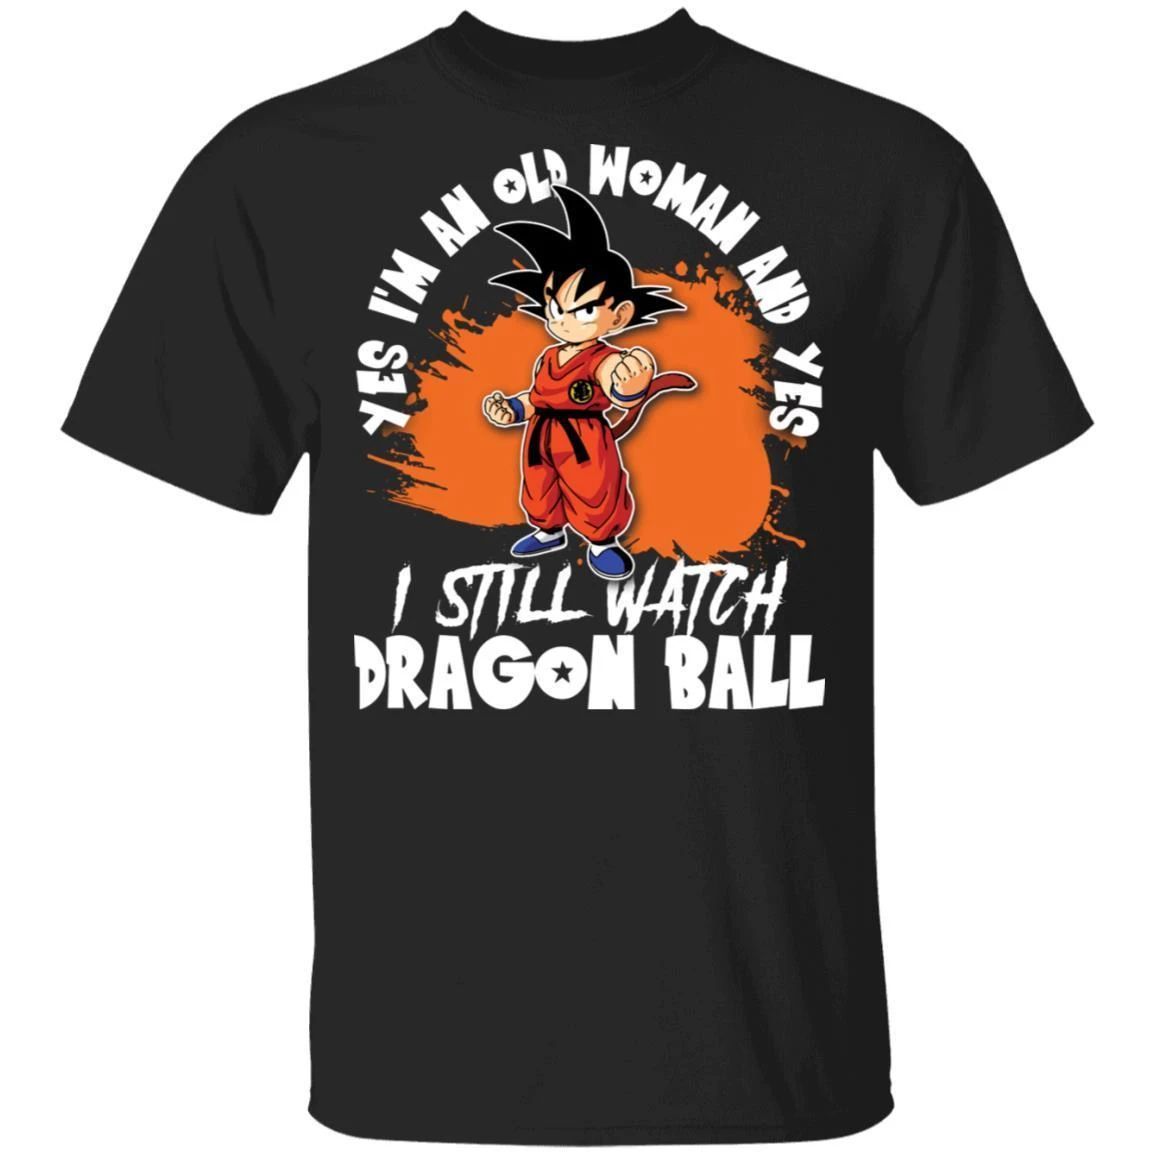 Yes I’m An Old Woman And Yes I Still Watch Dragon Ball Shirt Son Goku Tee